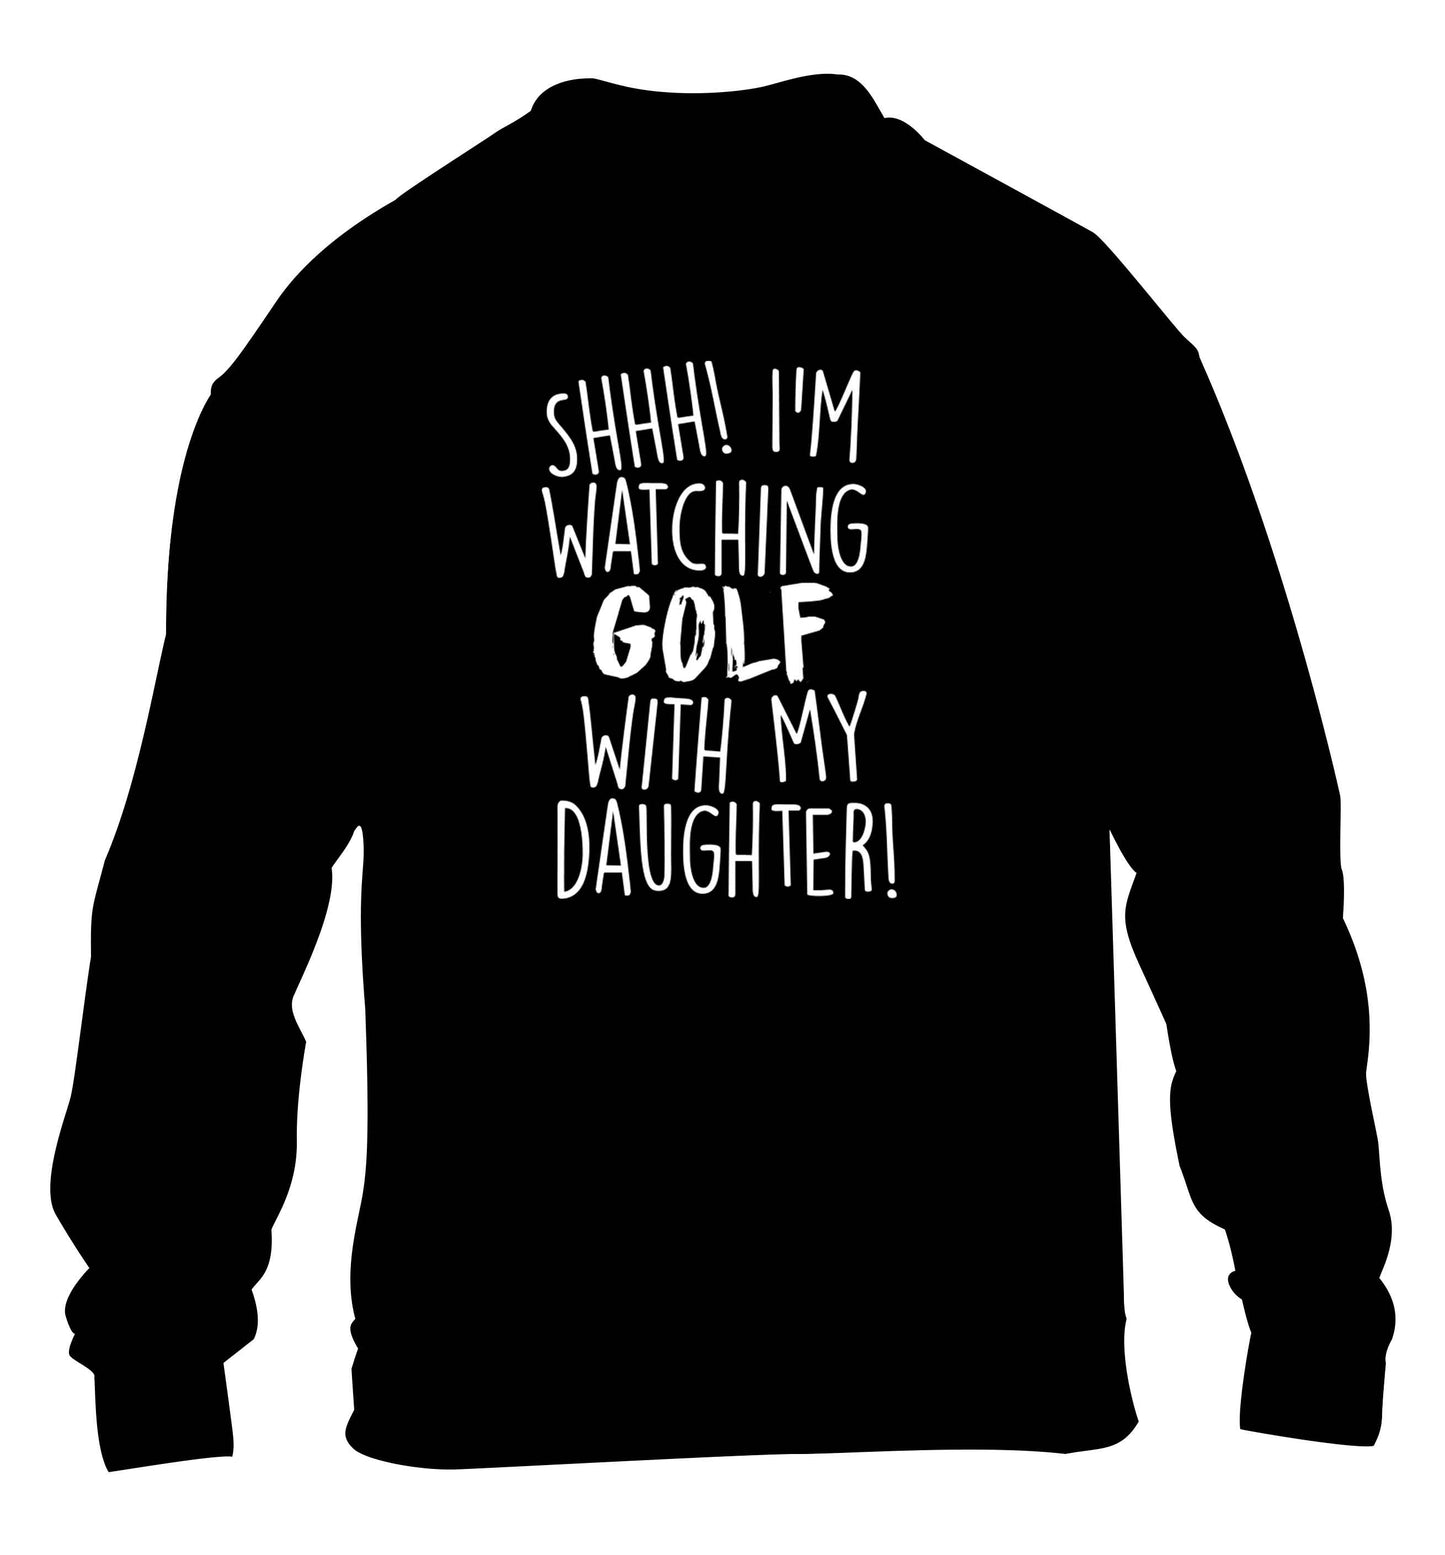 Shh I'm watching golf with my daughter children's black sweater 12-13 Years